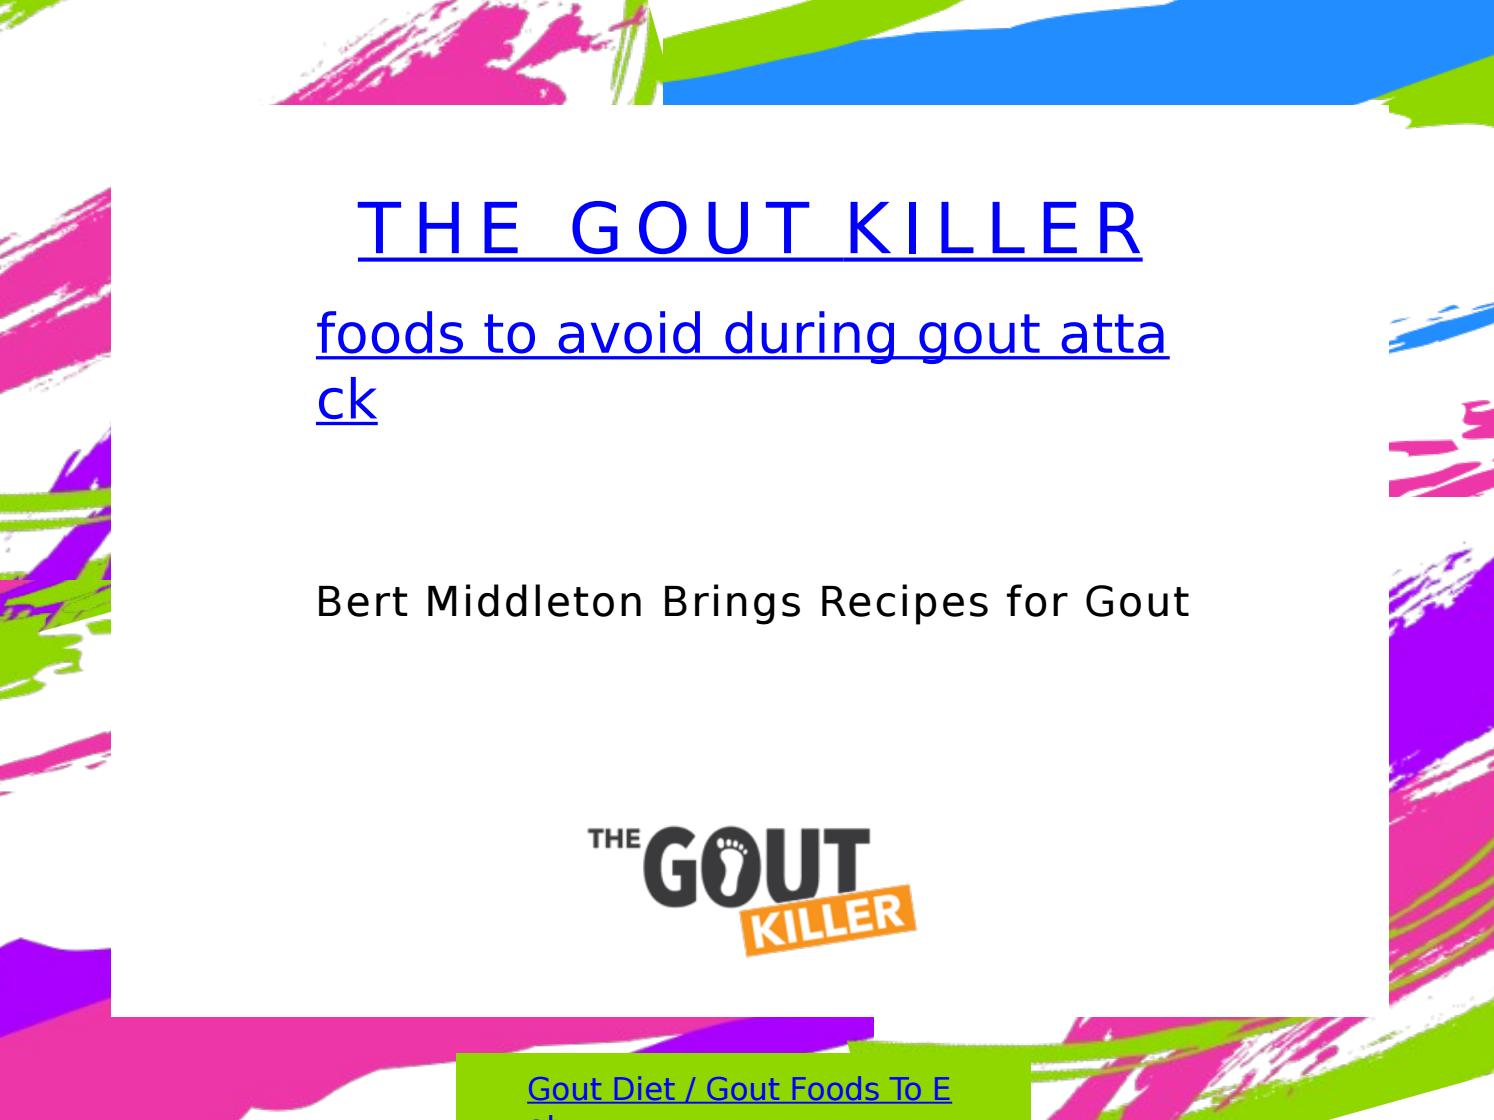 Foods To Avoid During Gout Attack by Gout Killer